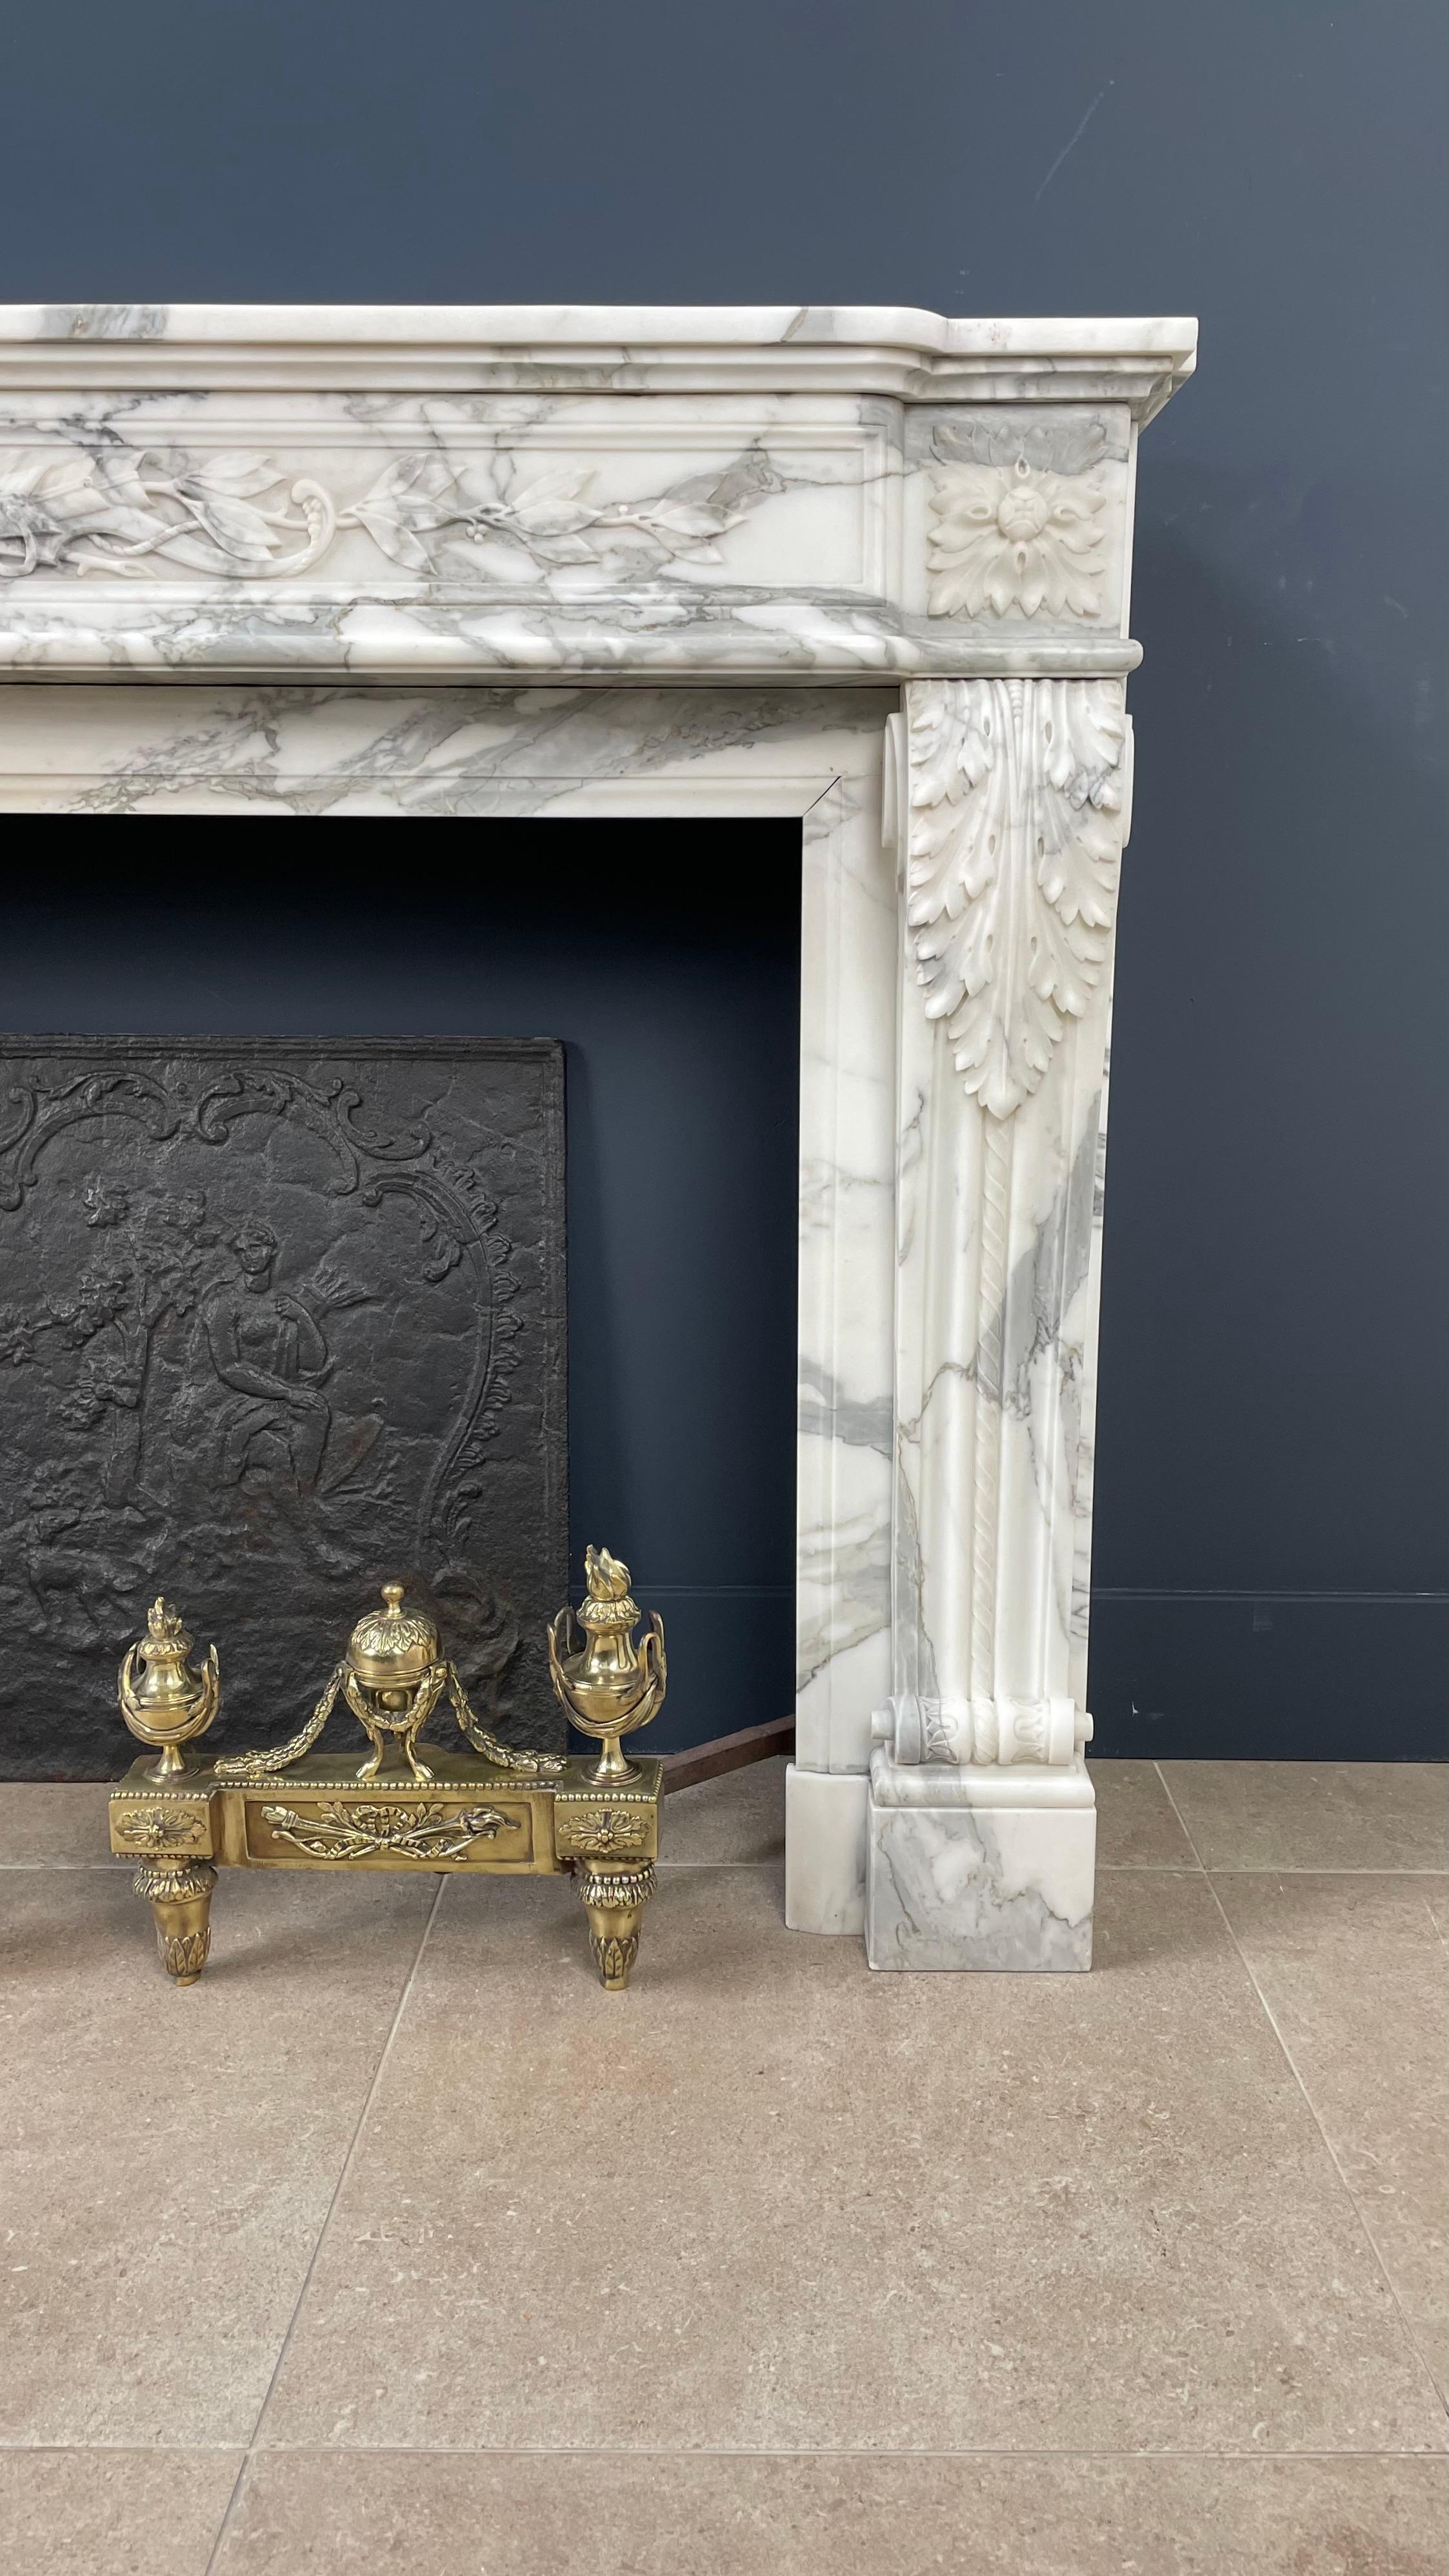 Introducing our exquisite Exclusive Antique Front Fireplace crafted from the stunning Arabescato Marble. This fireplace is a true testament to timeless beauty and exceptional craftsmanship. 

The Arabescato marble used in this fireplace is a marvel